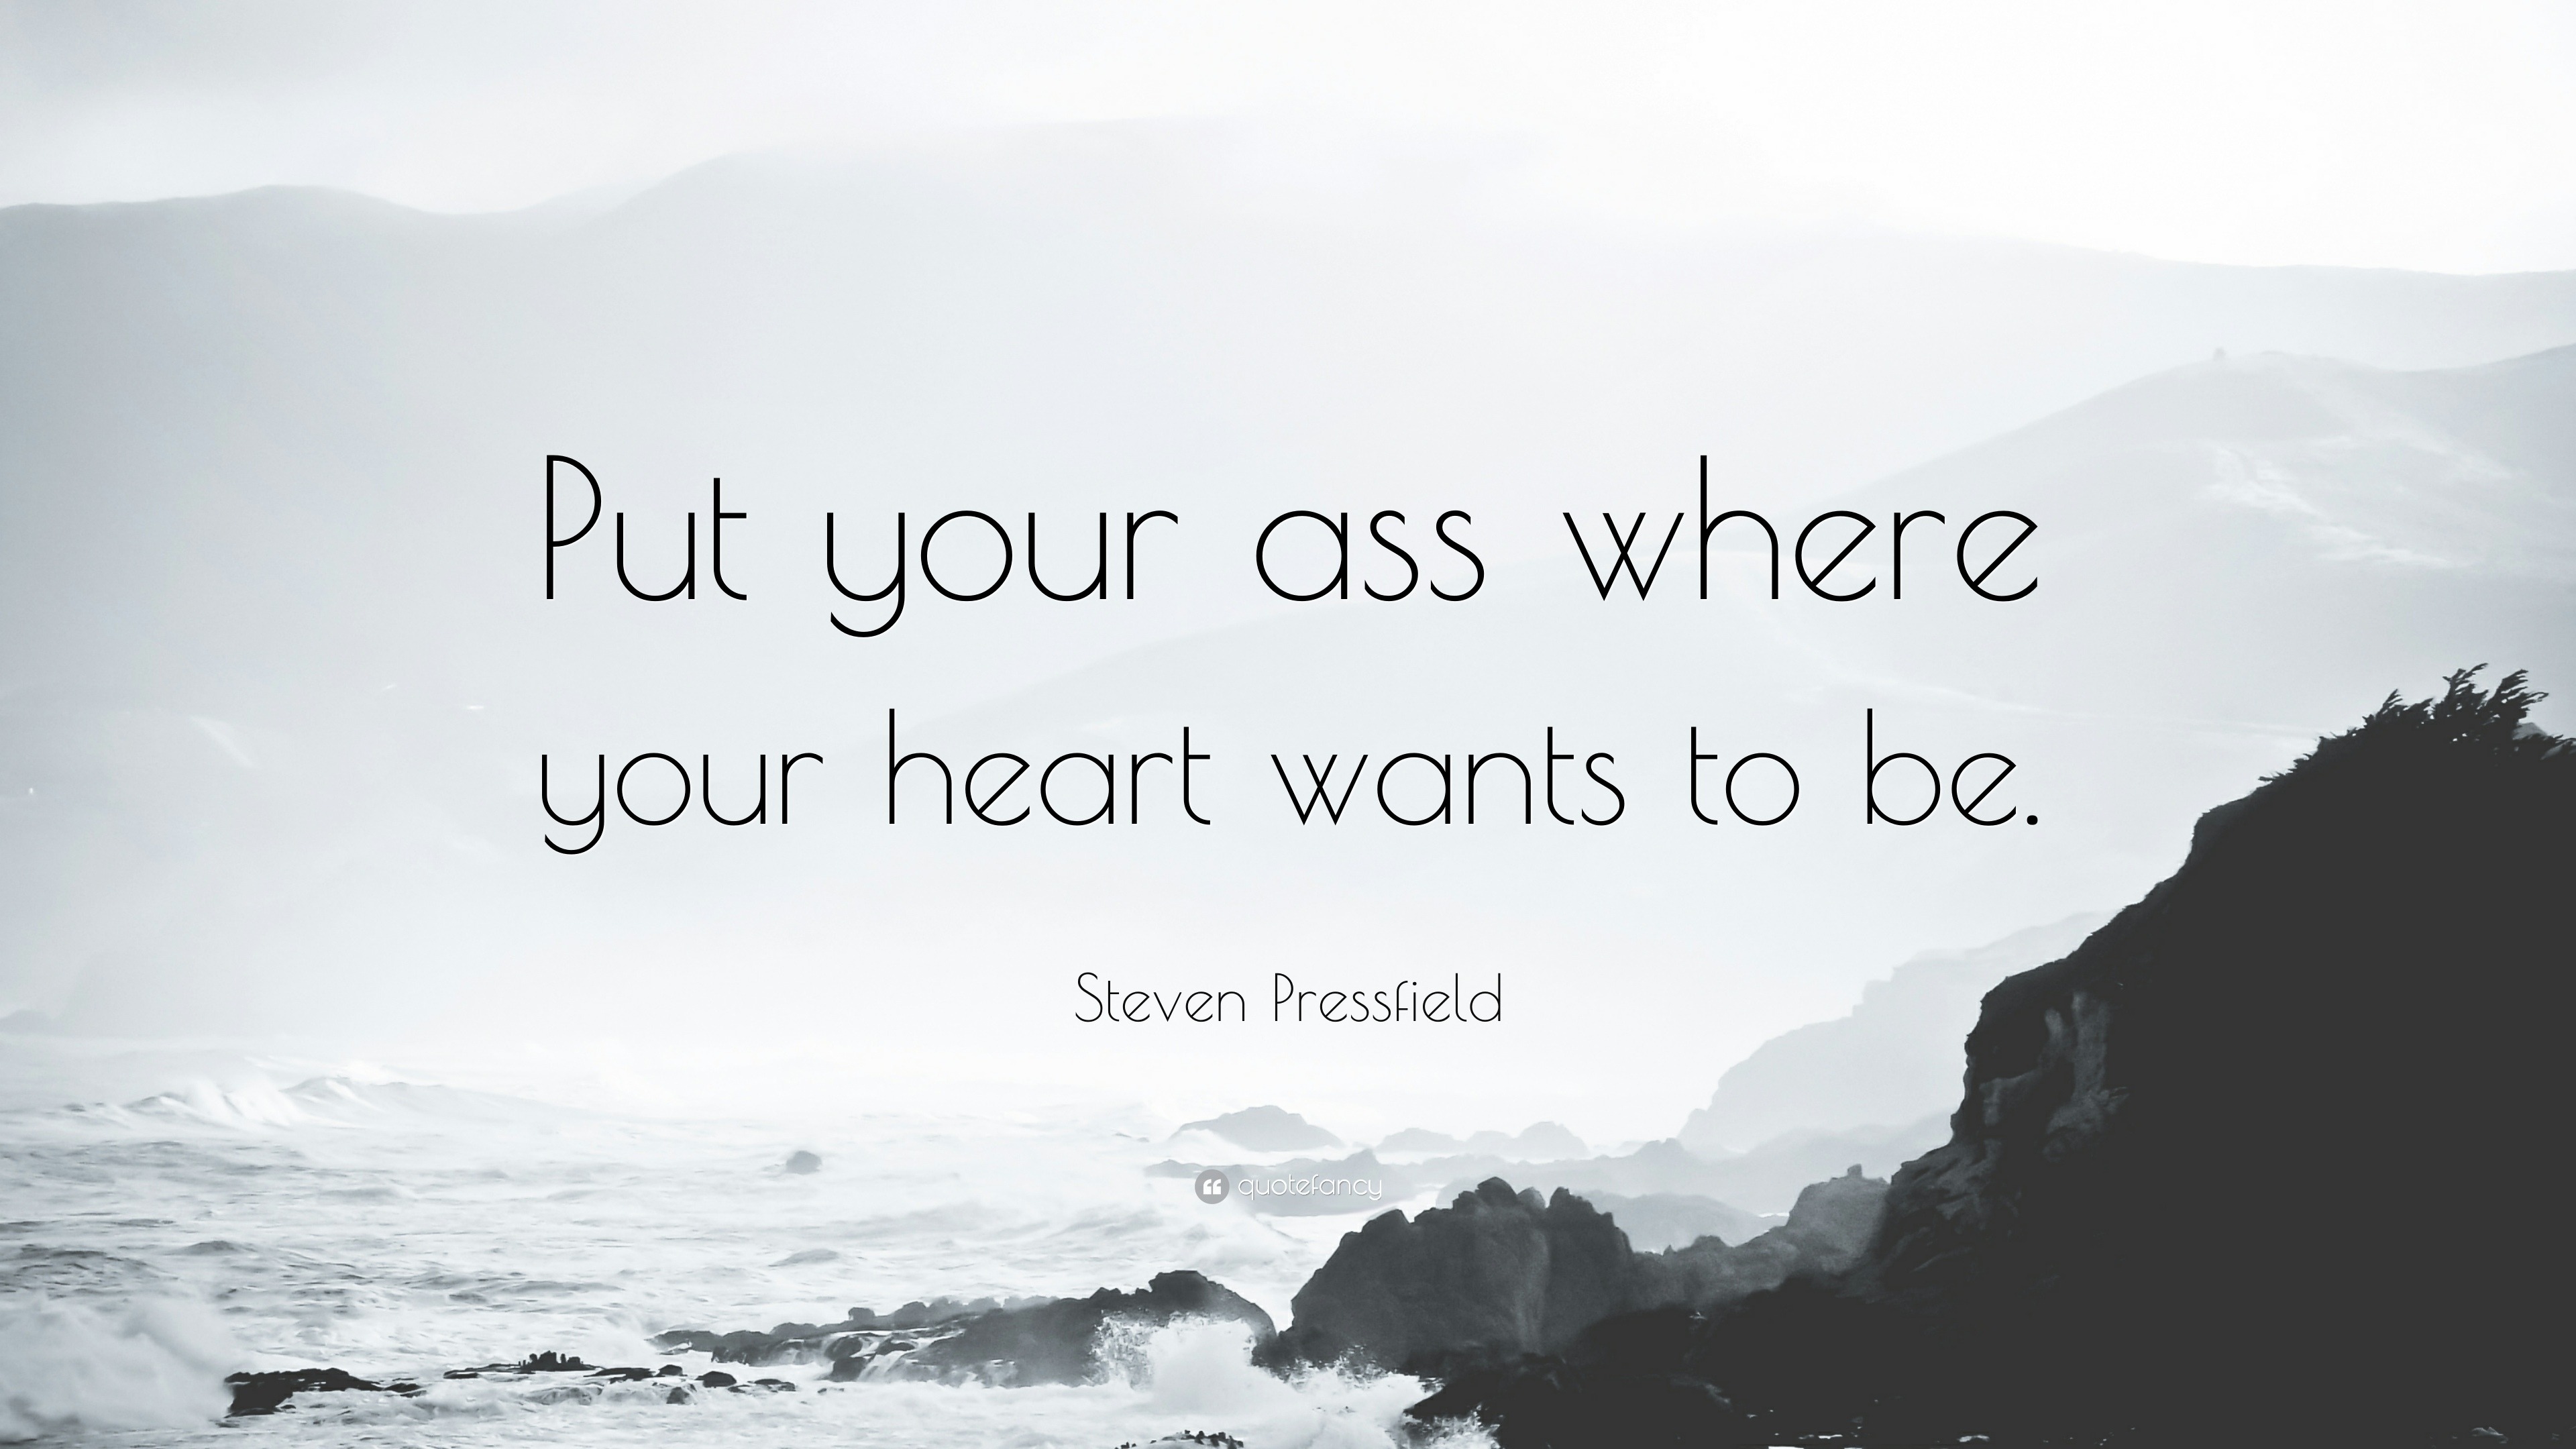 Put Your Ass Where Your Heart Wants to Be, by Steven Pressfield